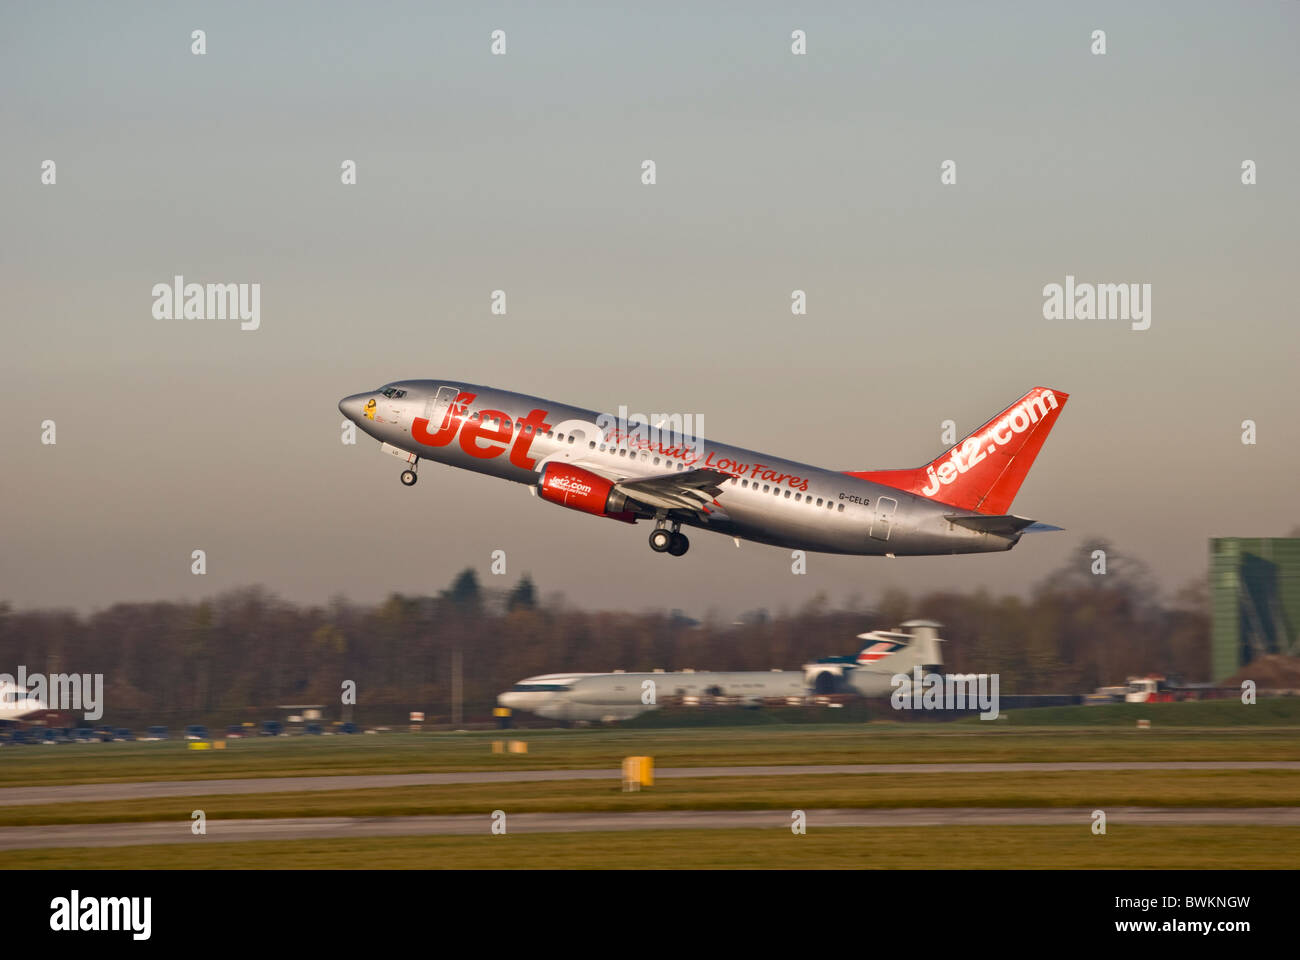 jet2.com boeing 737 airplane taking off from manchester ringway airport runway Stock Photo